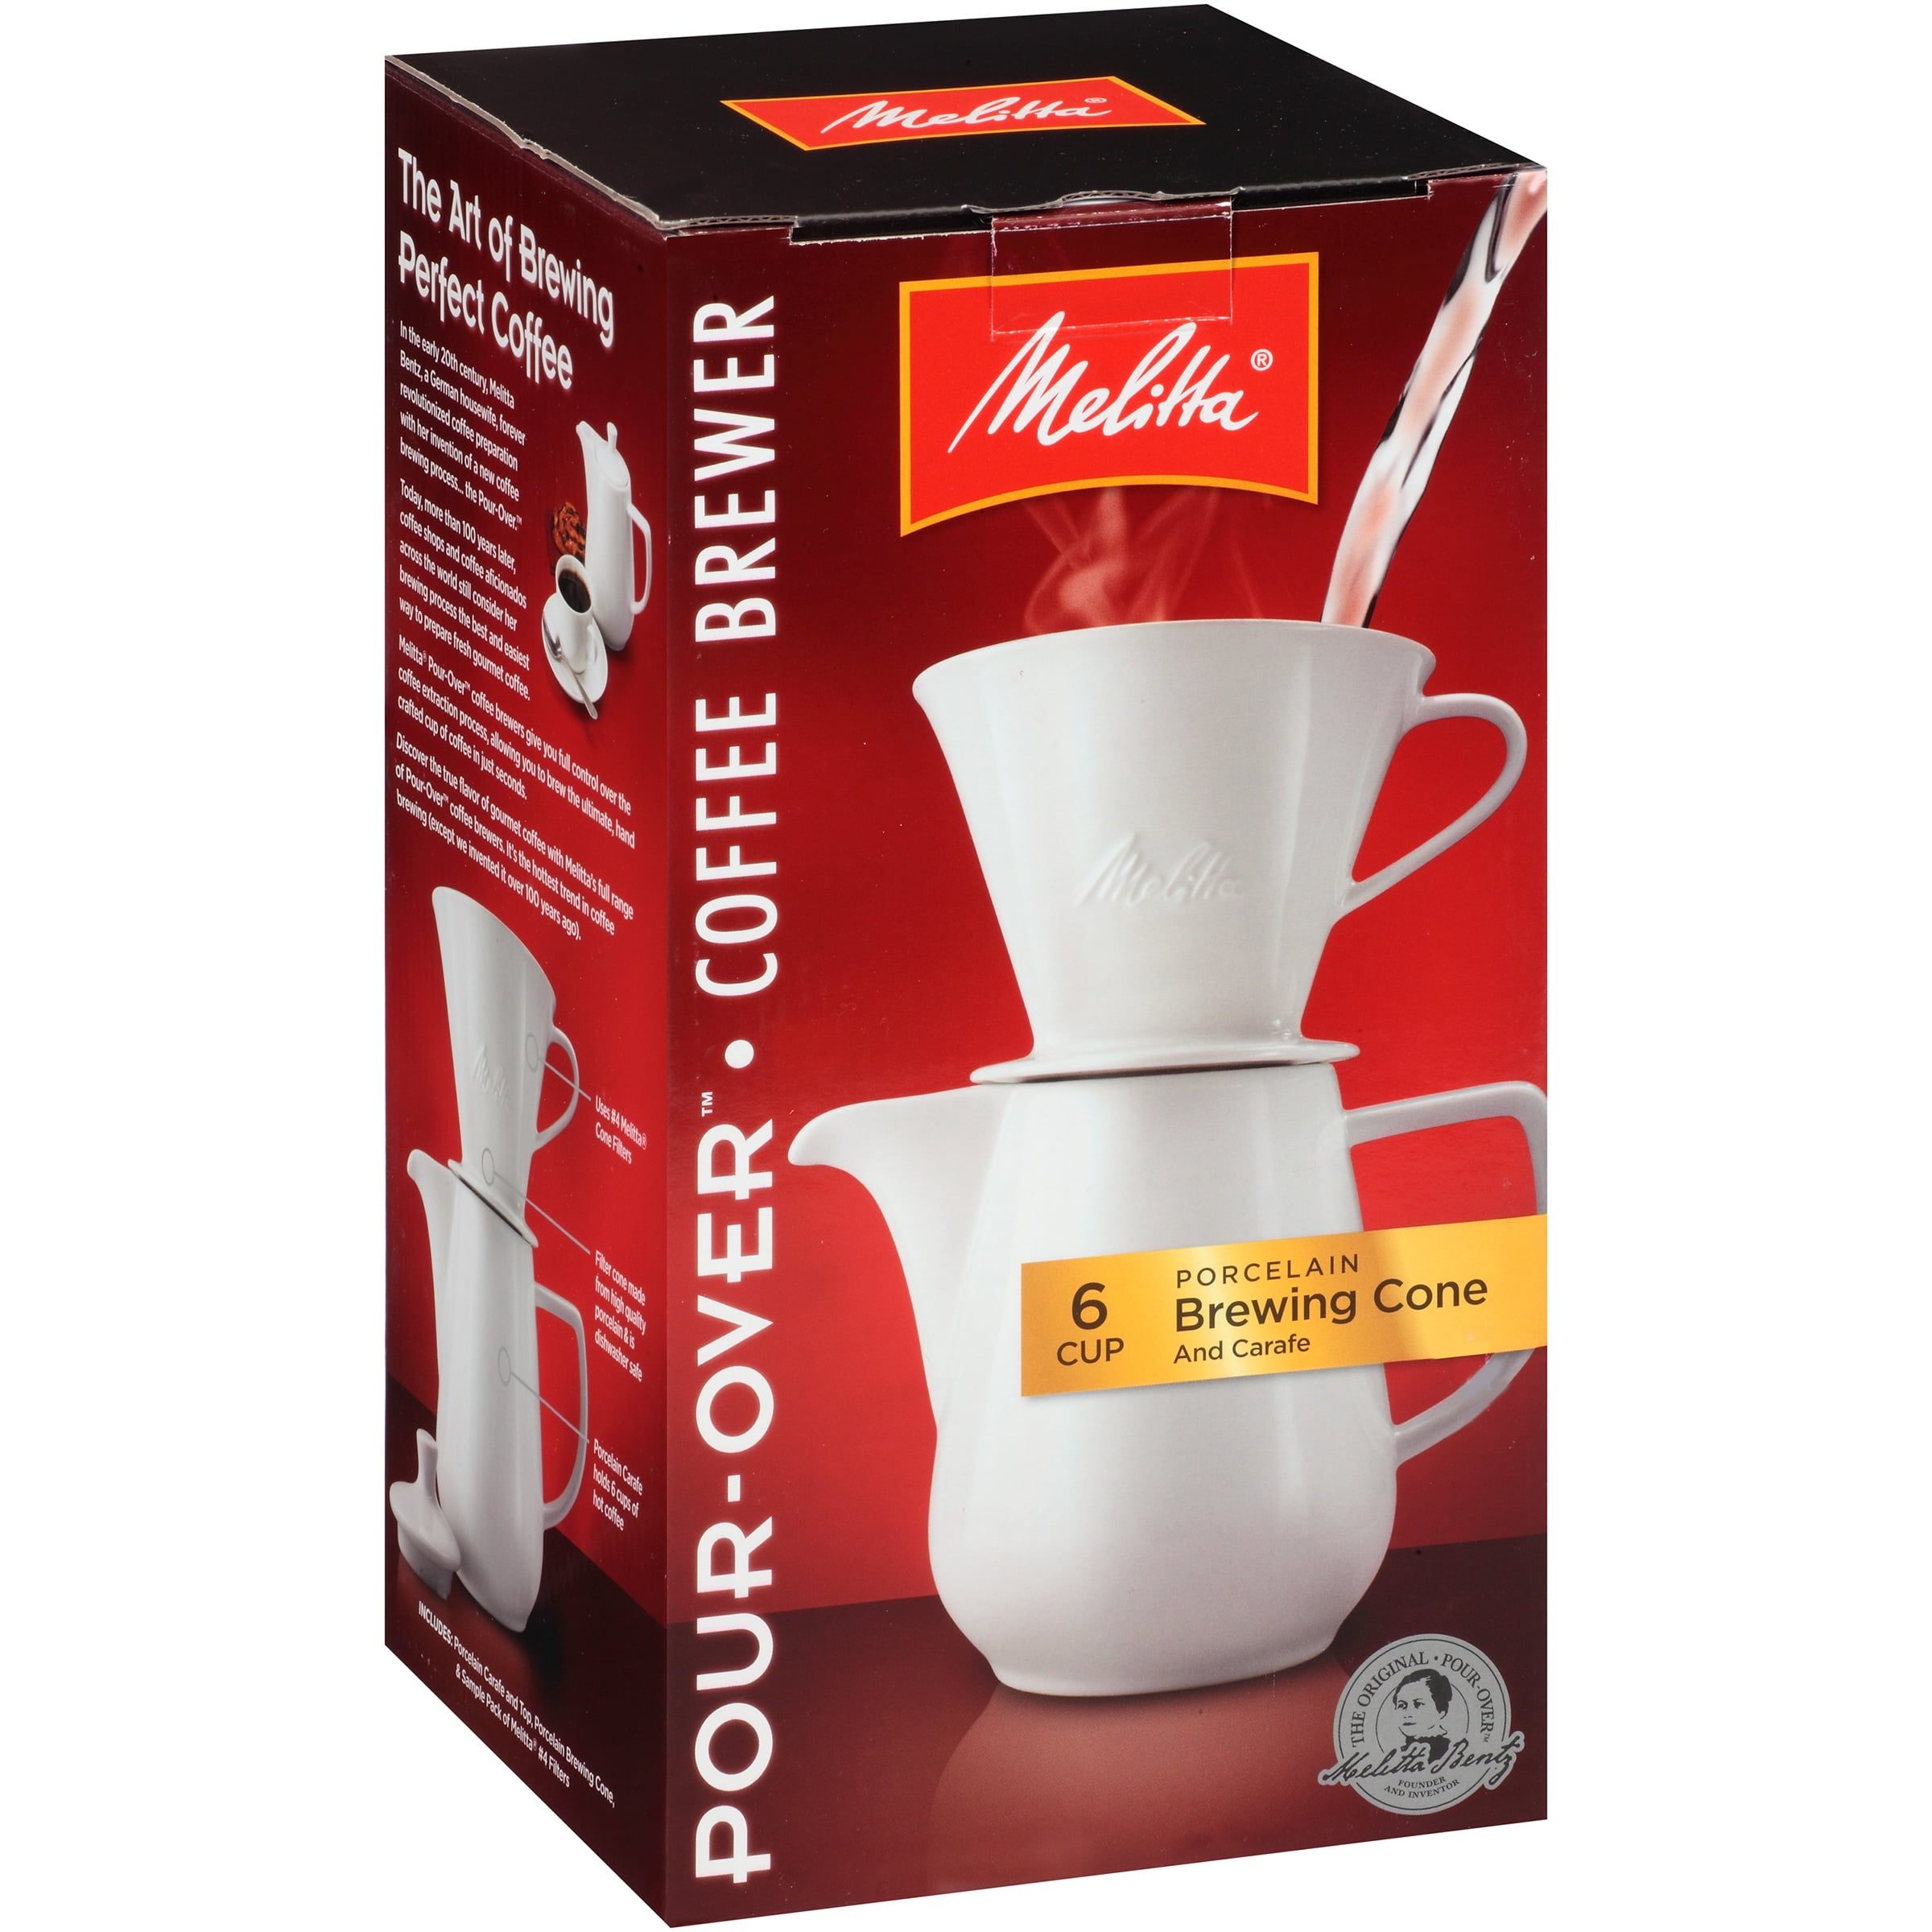 Melitta® Pour-Over? Porcelain Brewer 6 Cup Coffee Maker Box